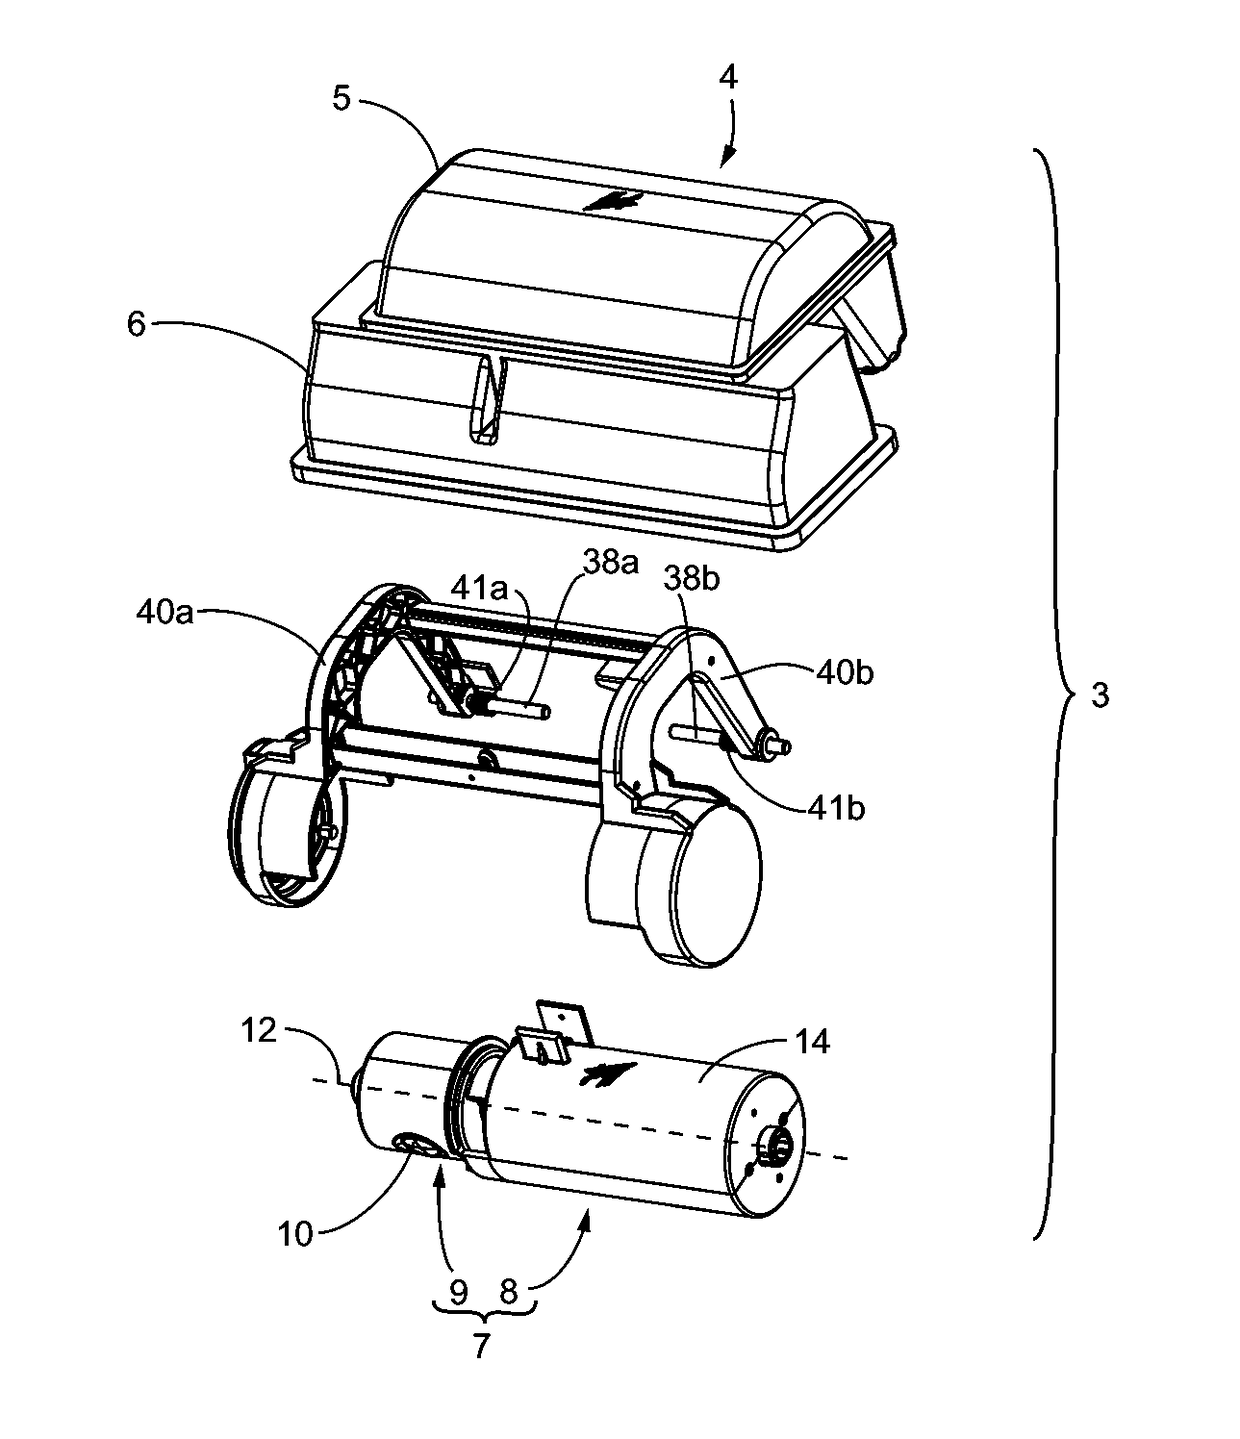 Camera apparatus for a motor vehicle